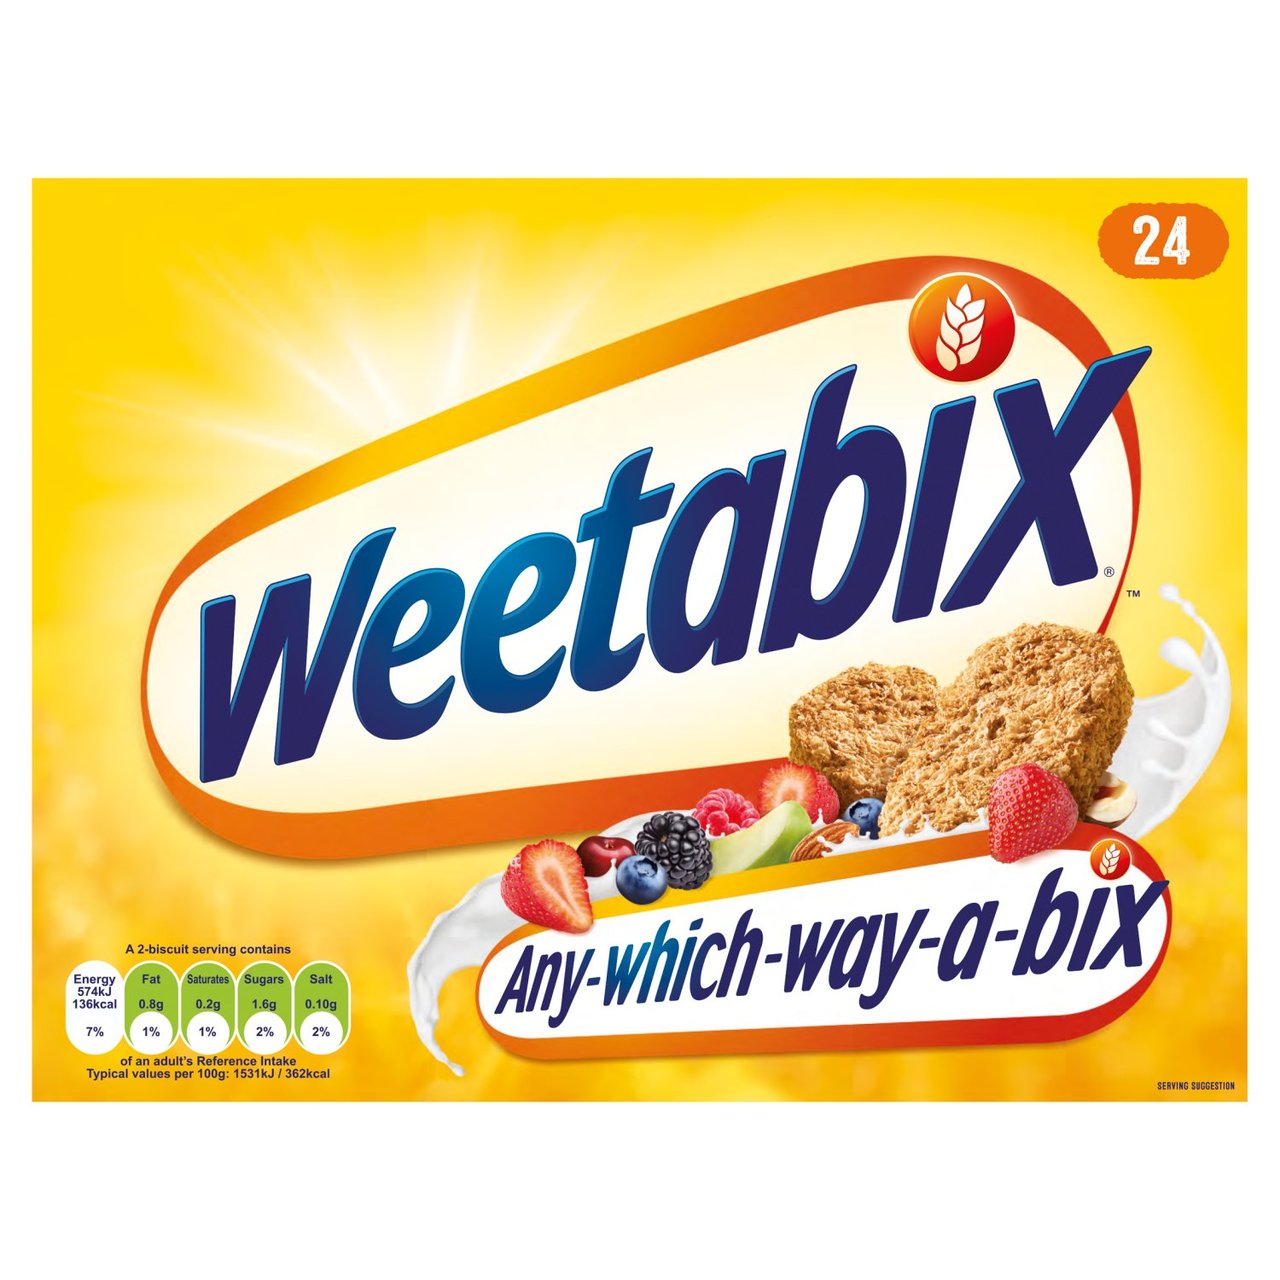 Weetabix Cereal 24 per pack